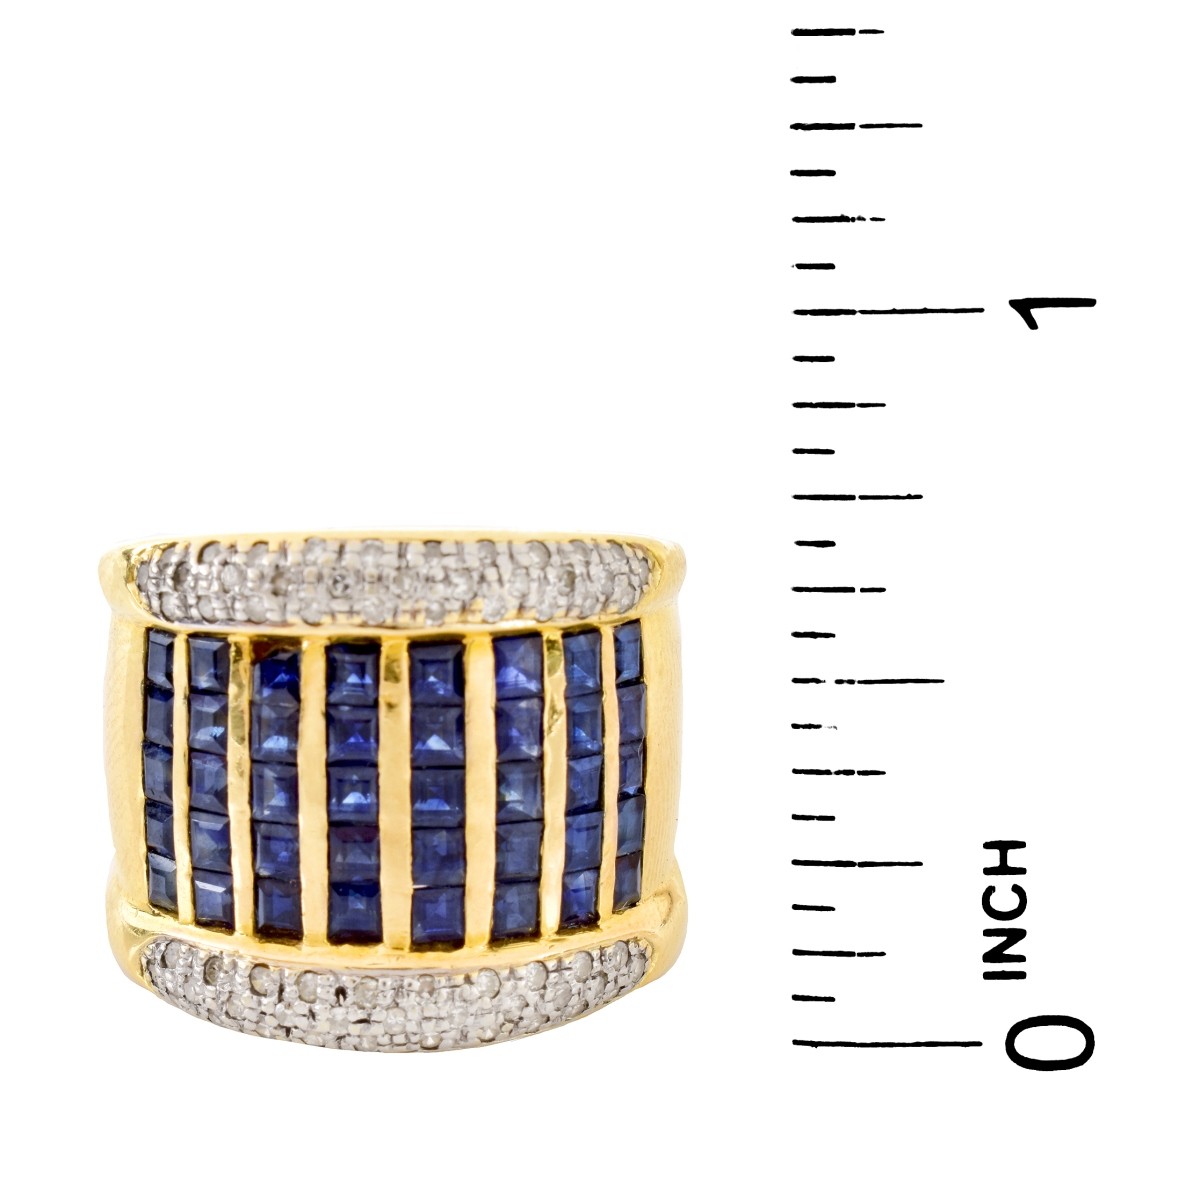 Sapphire, Diamond and 14K Gold Ring